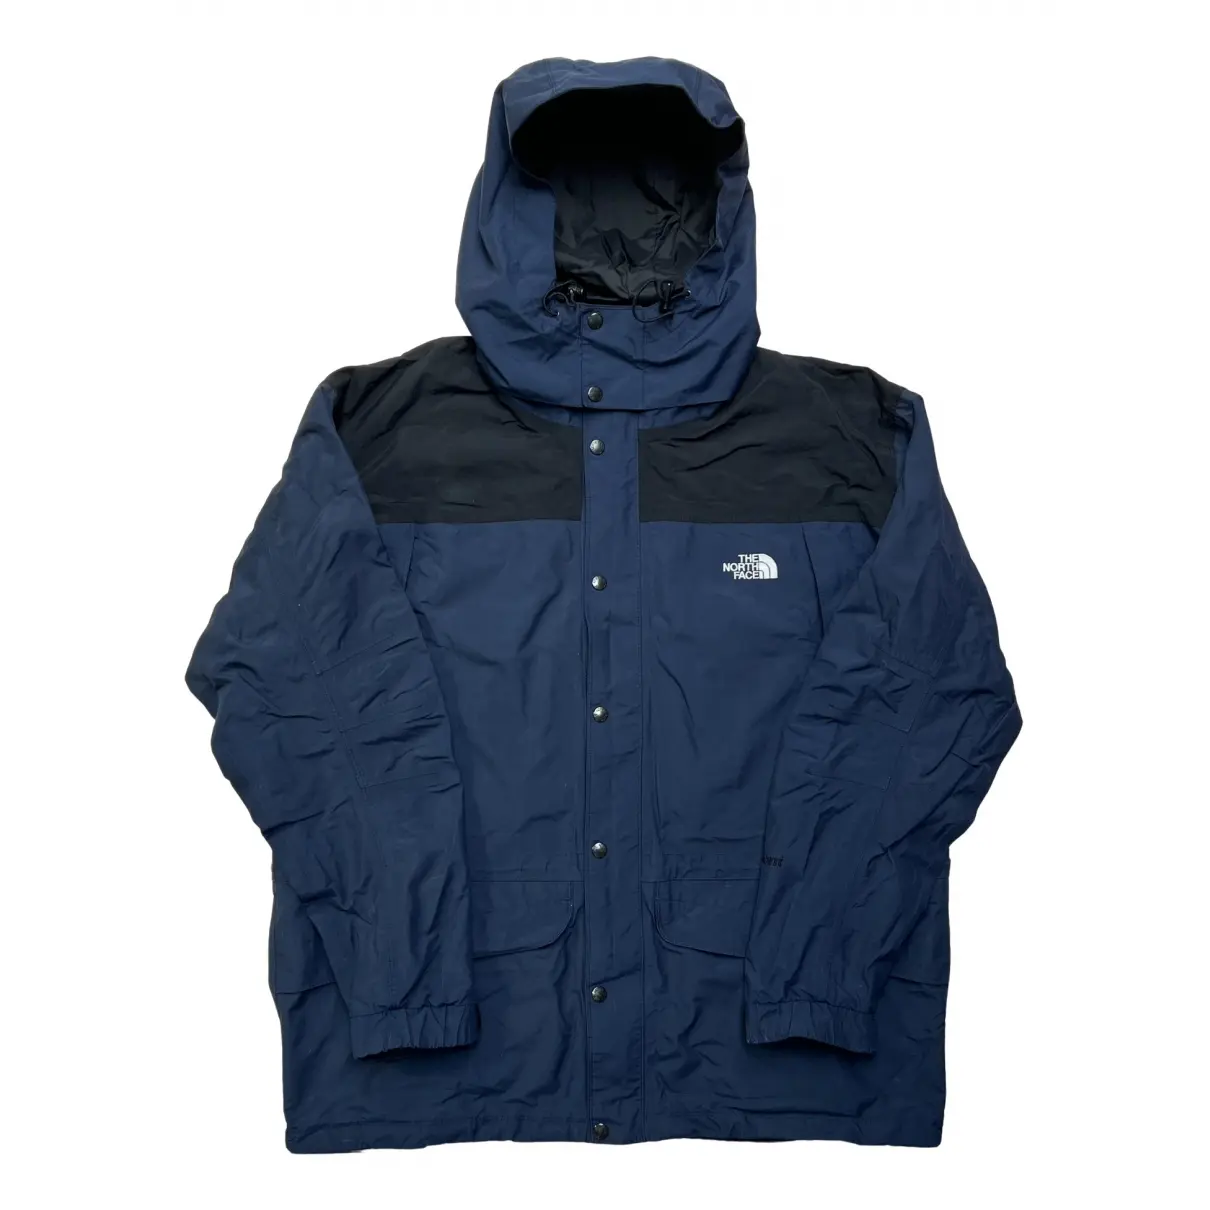 Jacket The North Face - Vintage